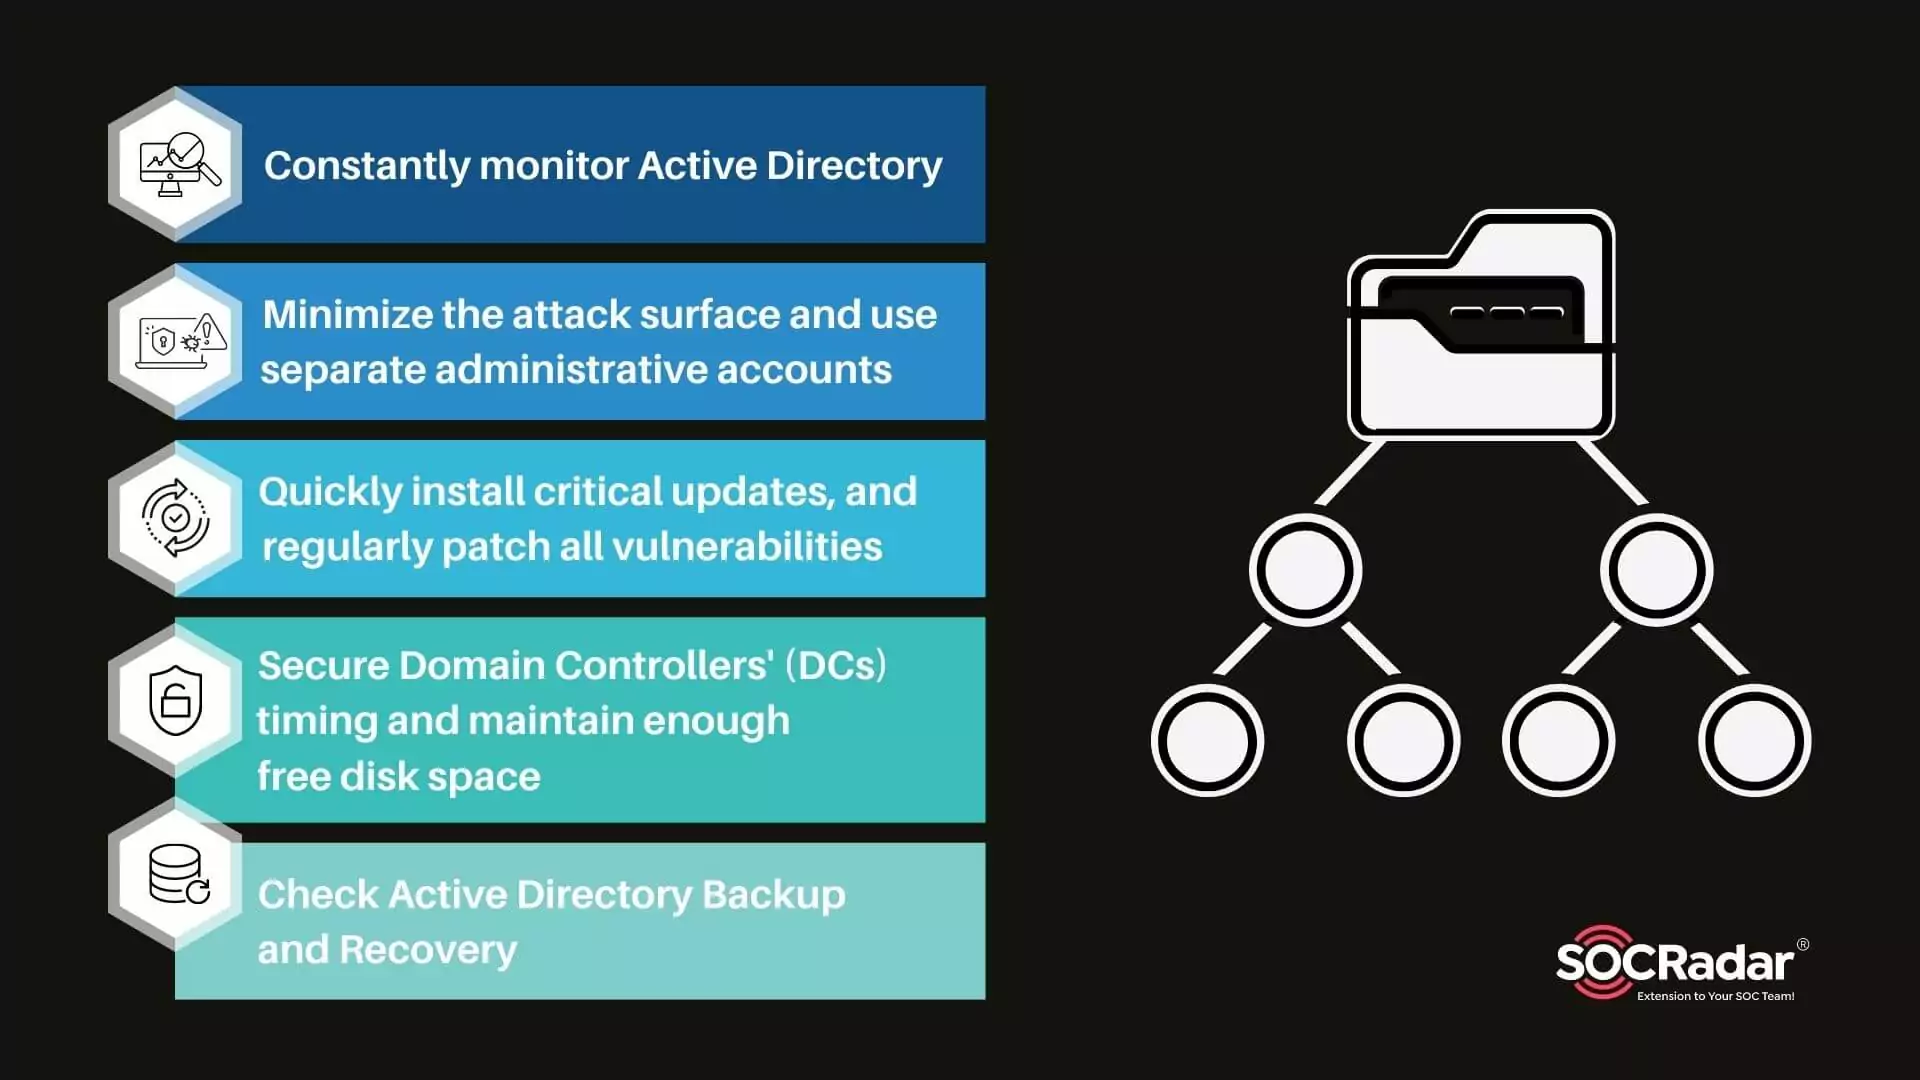 SOCRadar® Cyber Intelligence Inc. | Security for Active Directory in 5 Steps